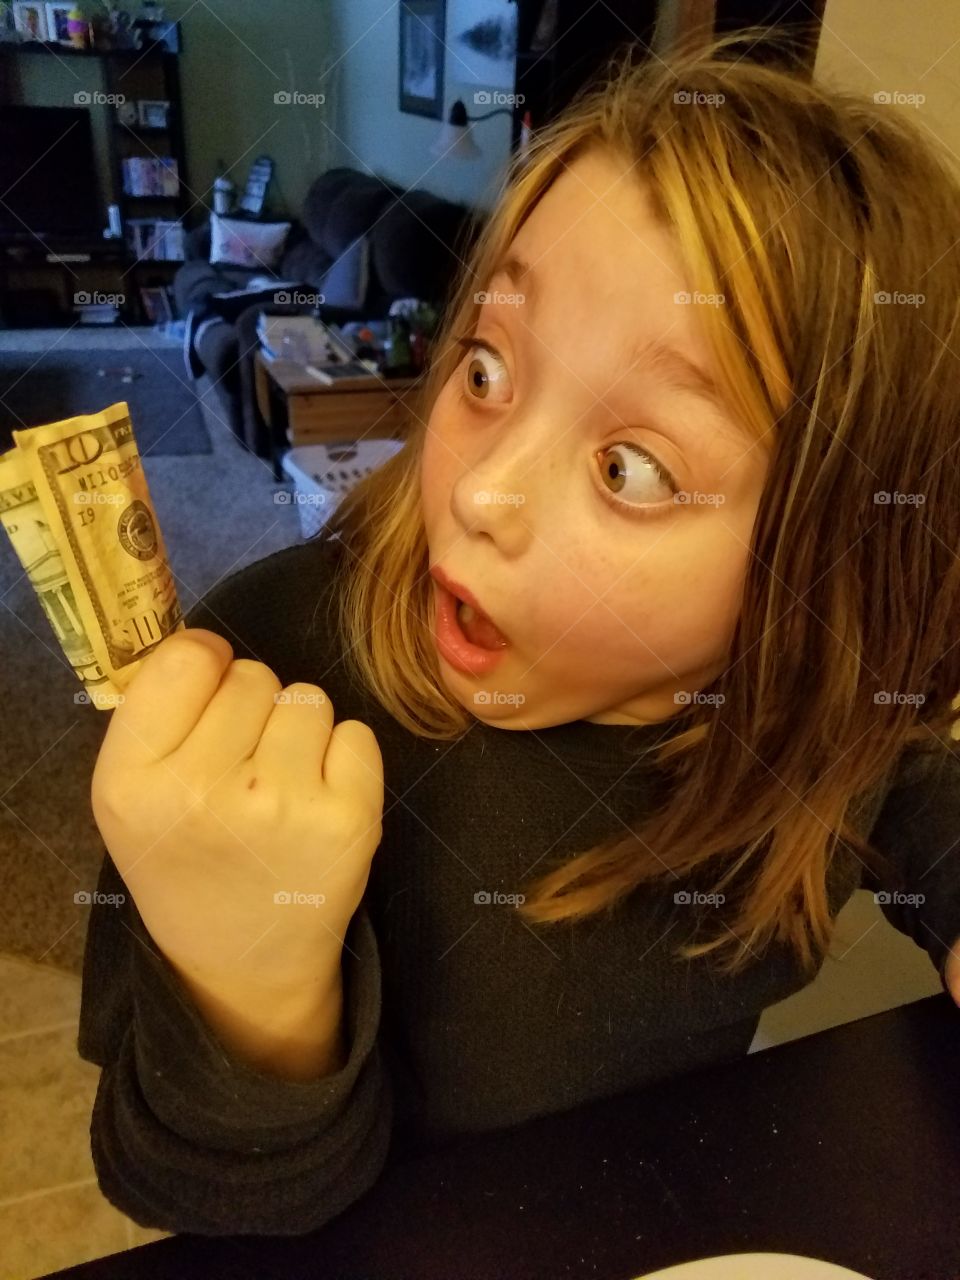 Child amazed at finding a 10 Dollar Bill. She reacts with a wide eye and open mouth.